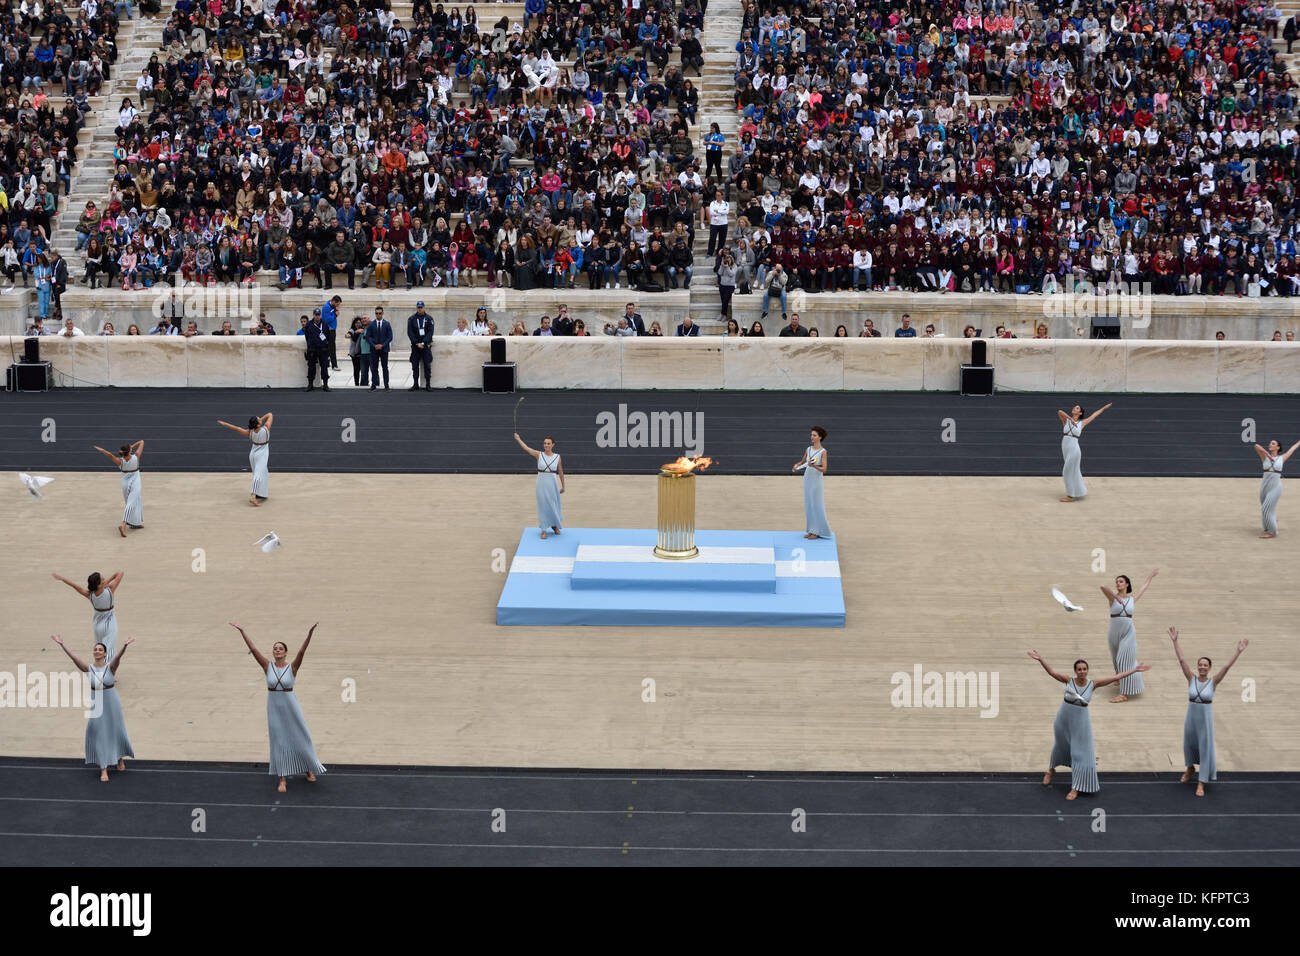 Athens, Greece, 31st October, 2017. Priestesses perform during the handover ceremony of the Olympic Flame for the PyeongChang 2018 winter Olympics  at Panathenaic Stadium  in Athens, Greece. Credit: Nicolas Koutsokostas/Alamy Live News. Stock Photo